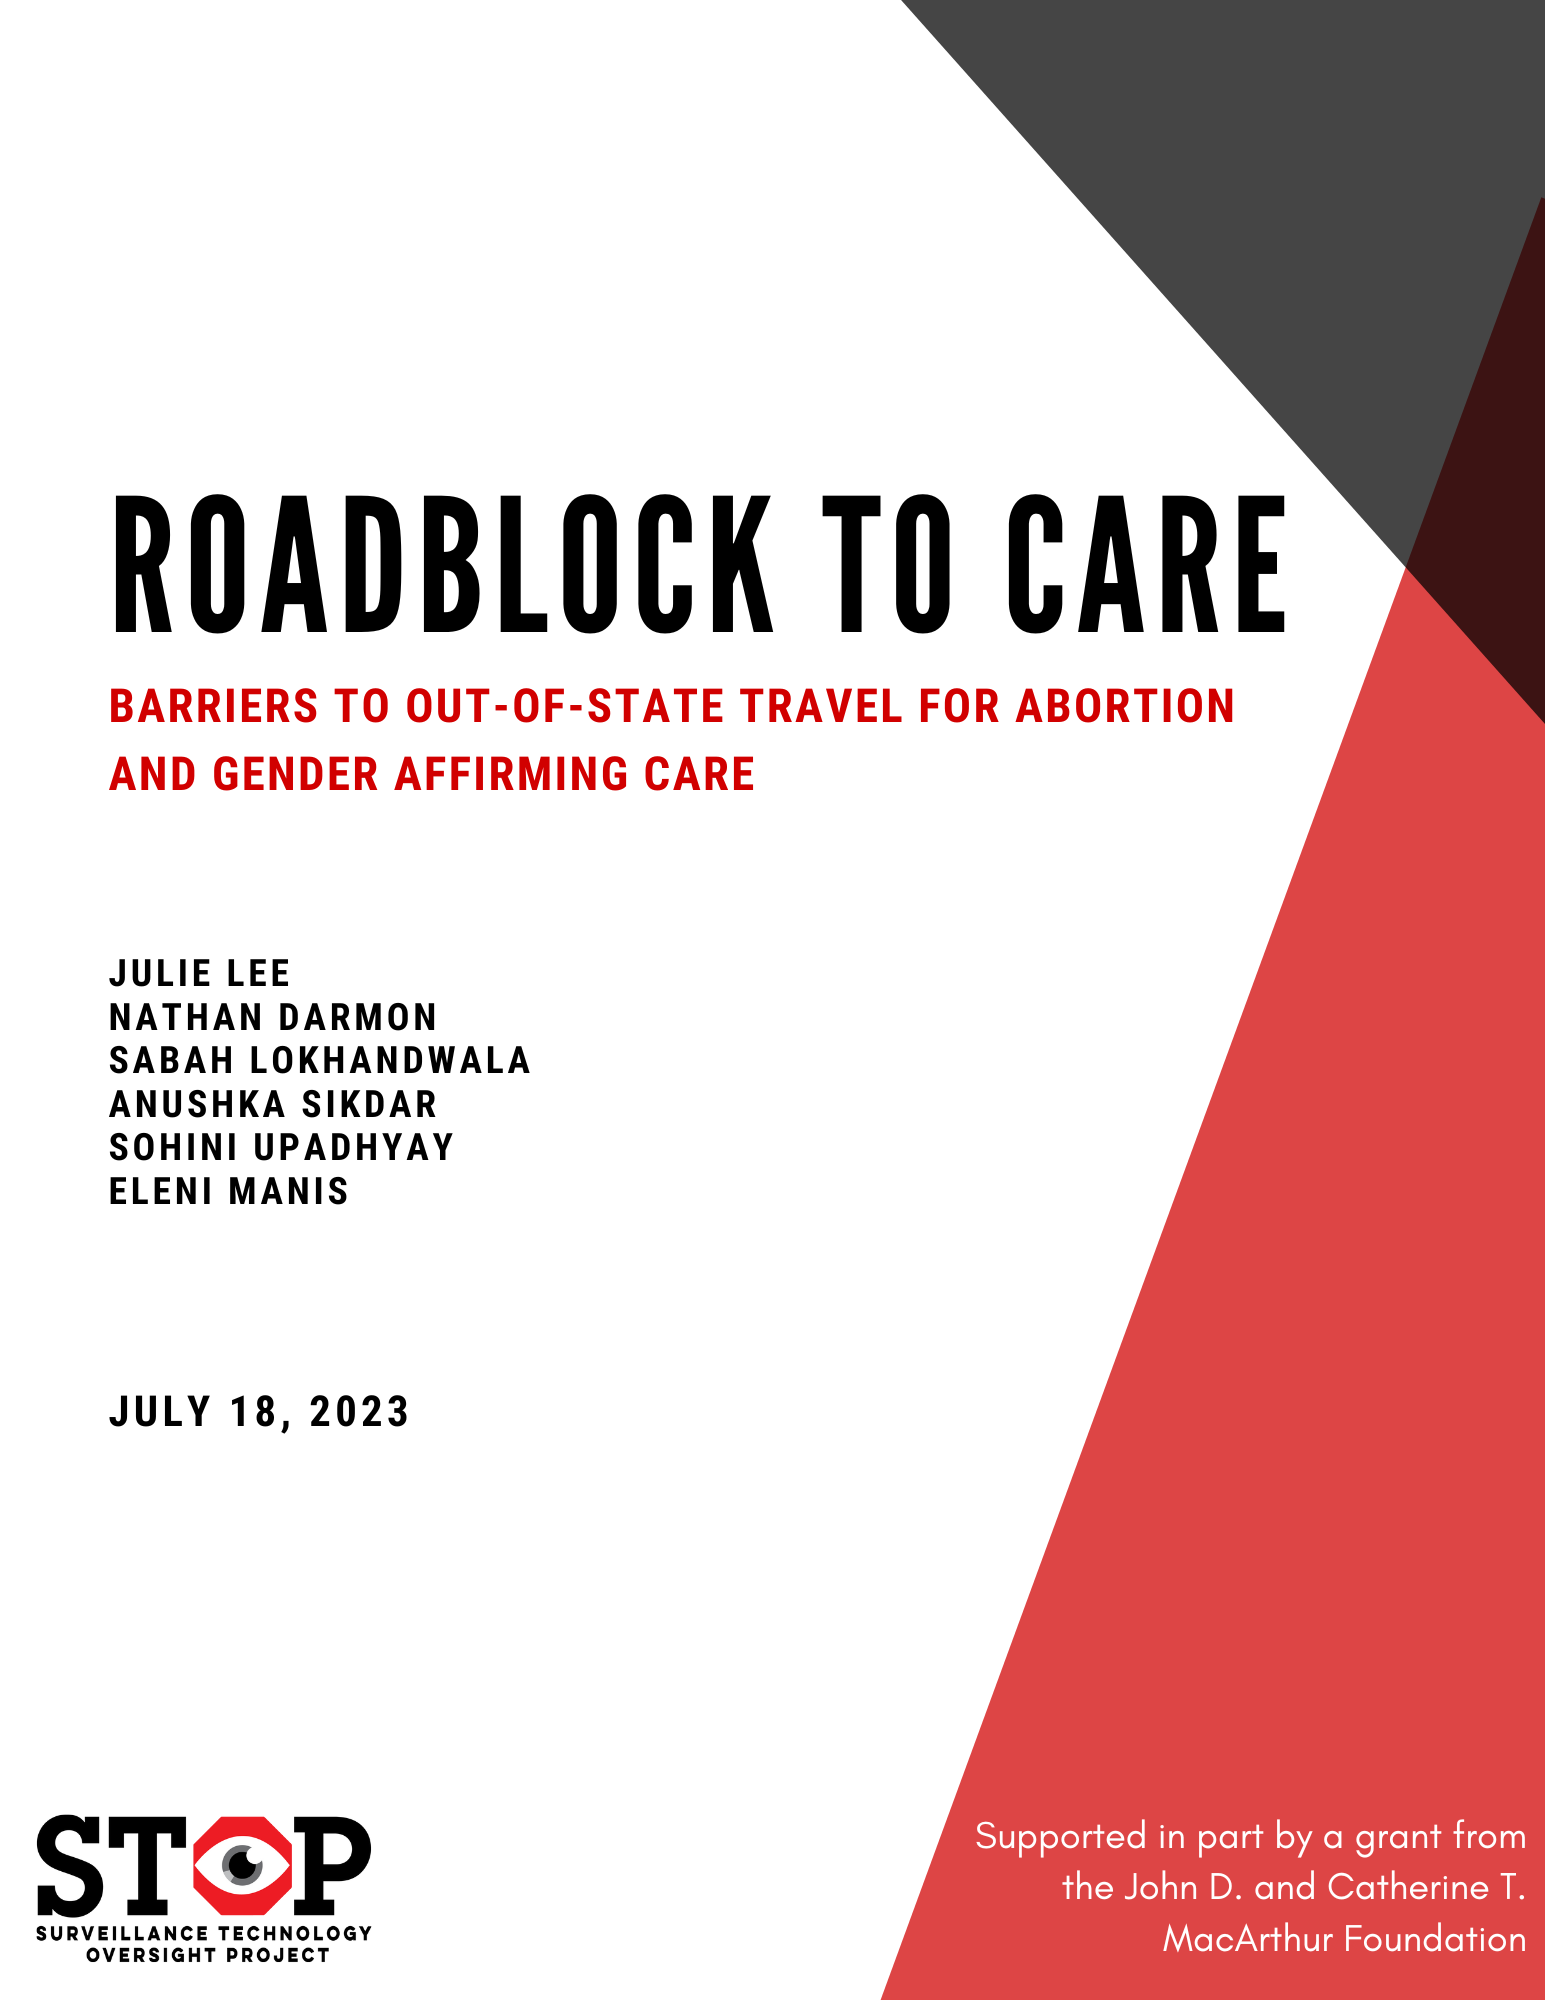 Roadblock to Care: Barriers to Out-of-State Travel for Abortion and Gender Affirming Care